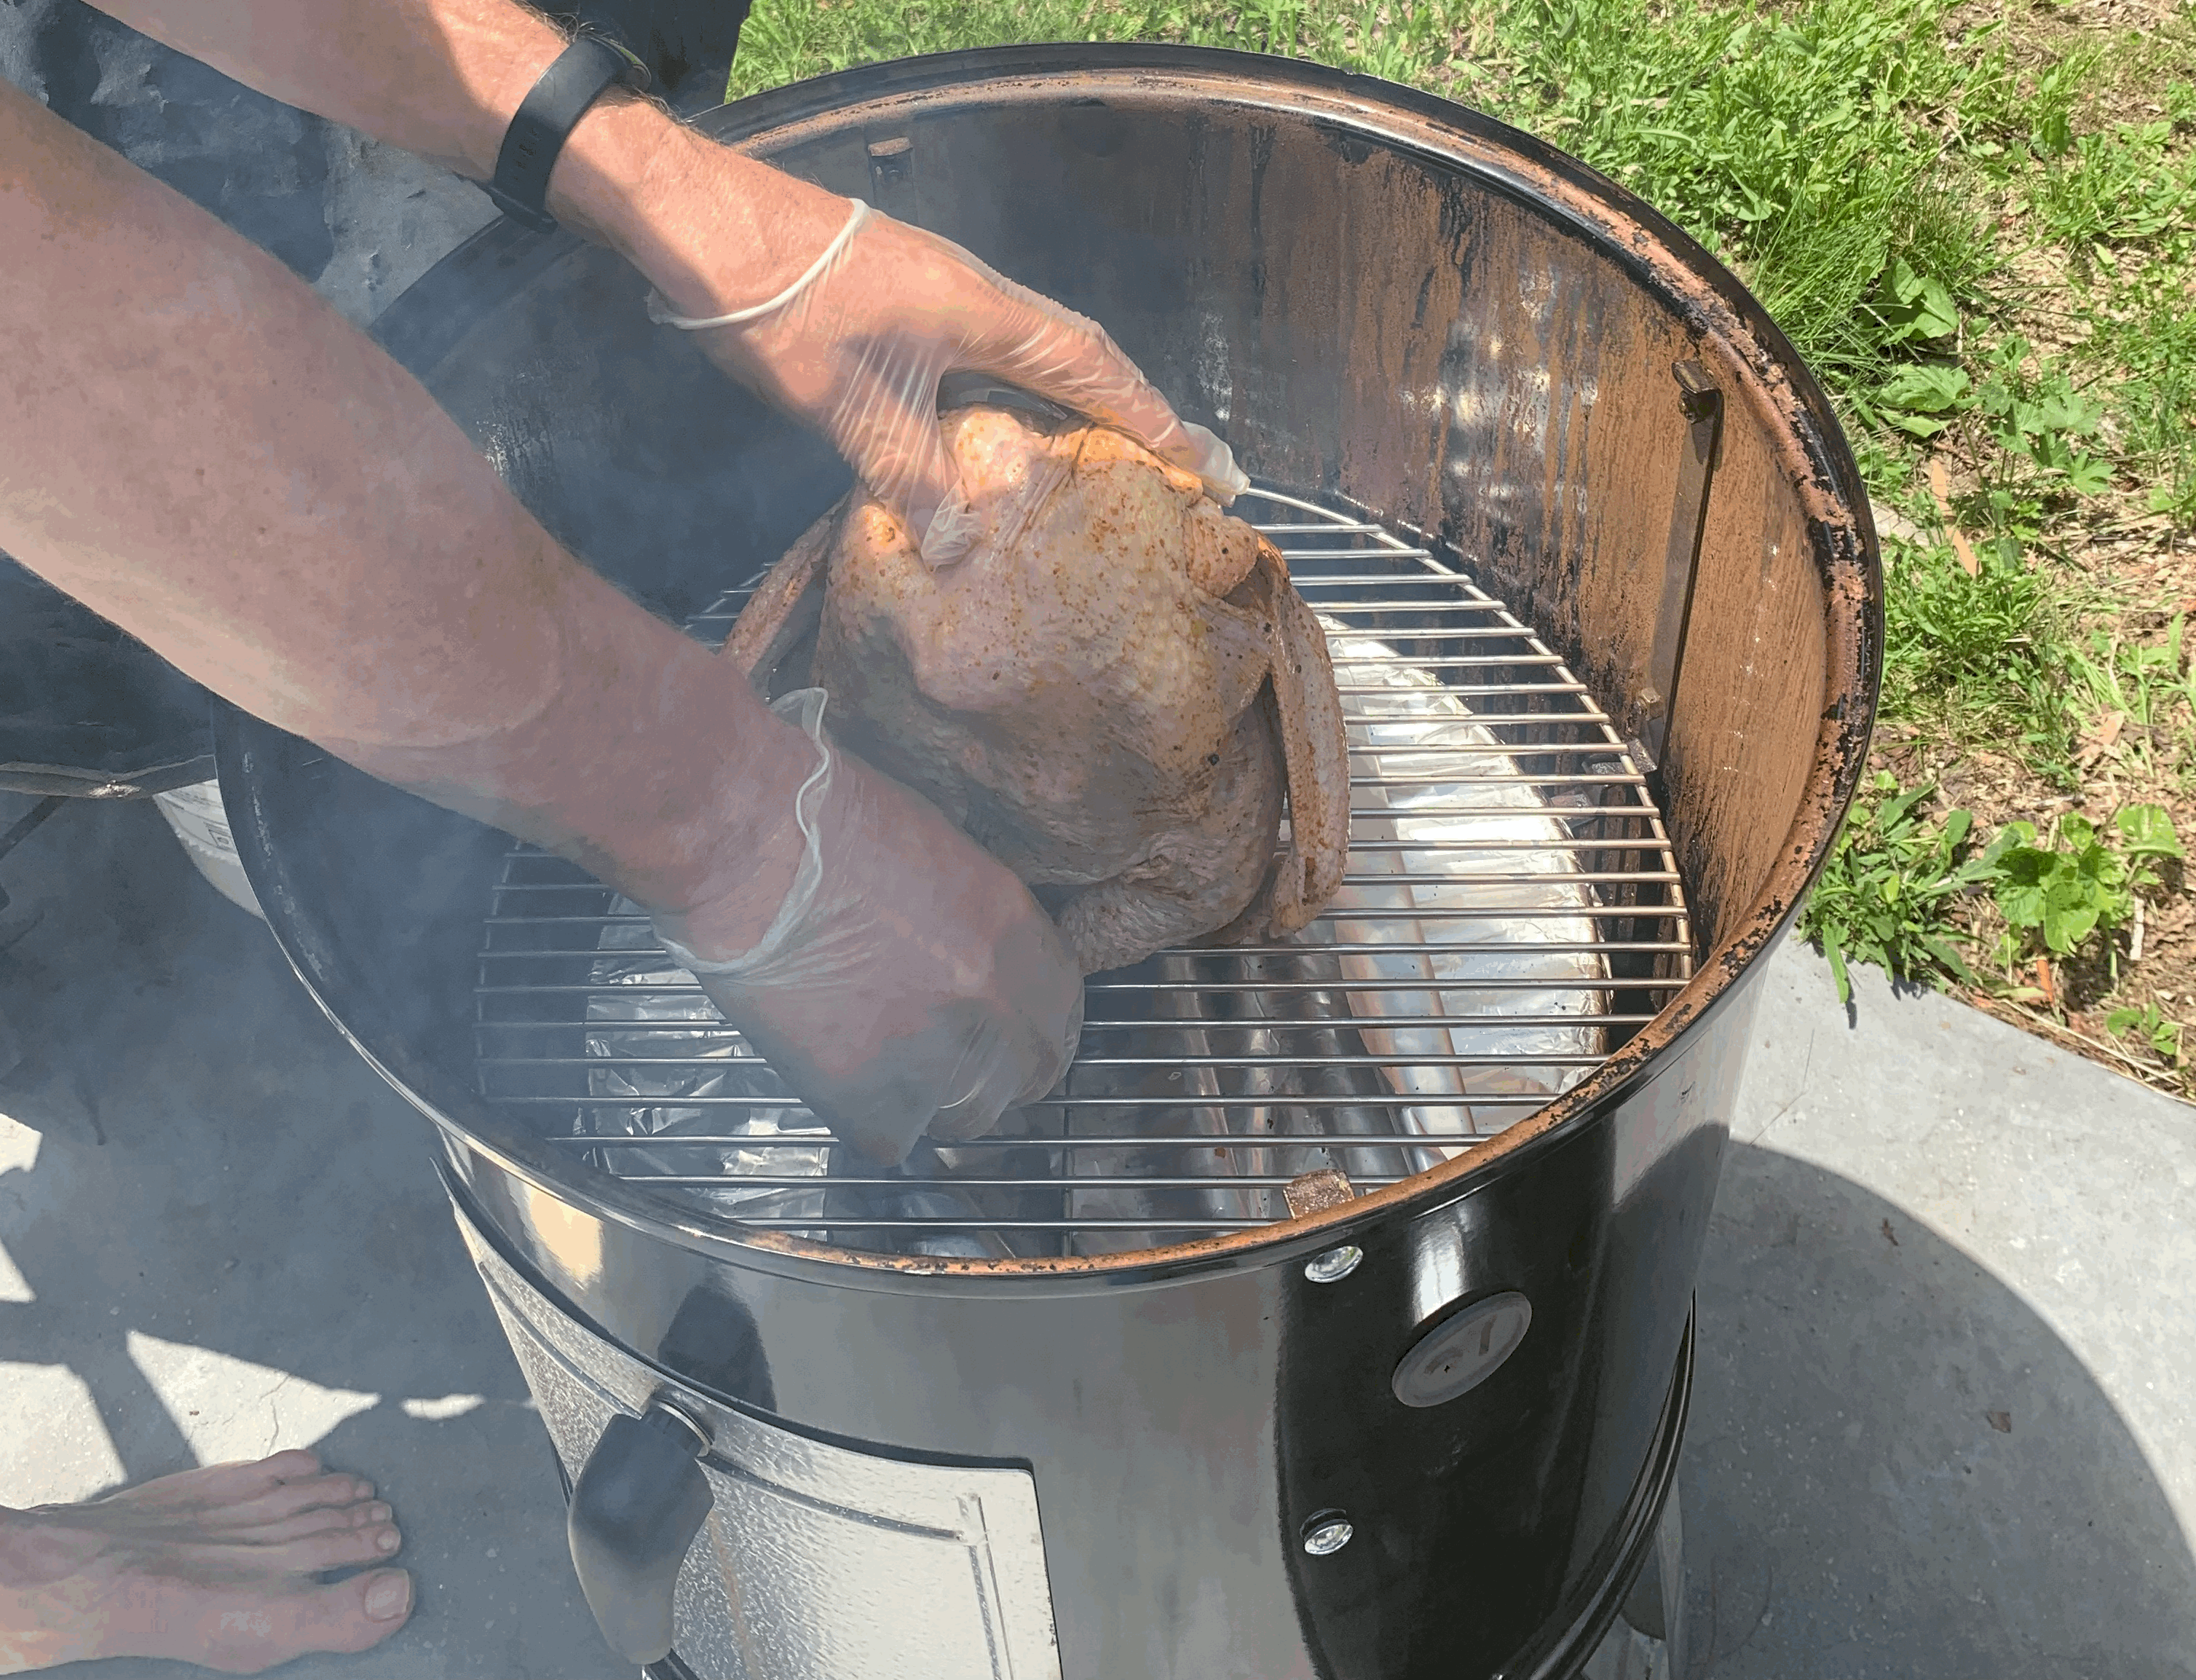 Beer Can Smoked Chicken